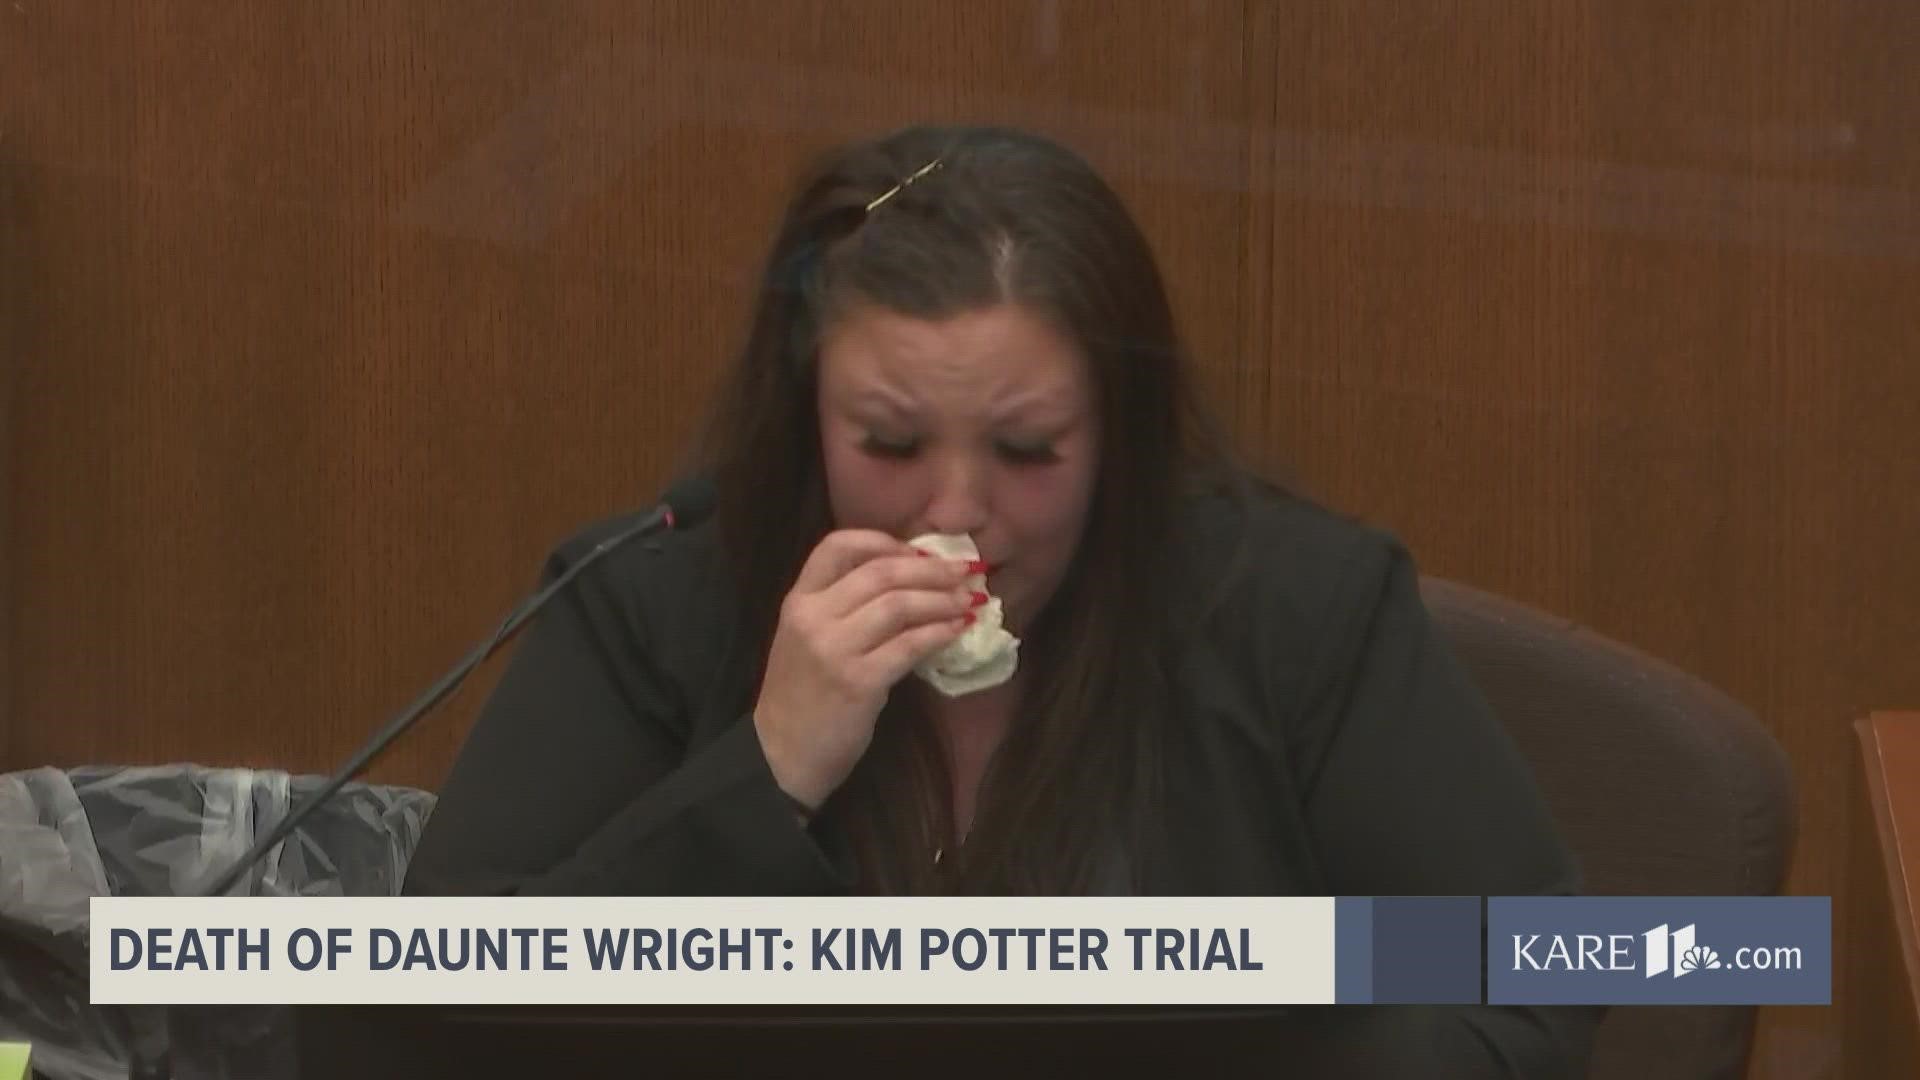 Katie Bryant, Daunte Wright's mother, fights back tears as she discusses the last phone call she had with her son.